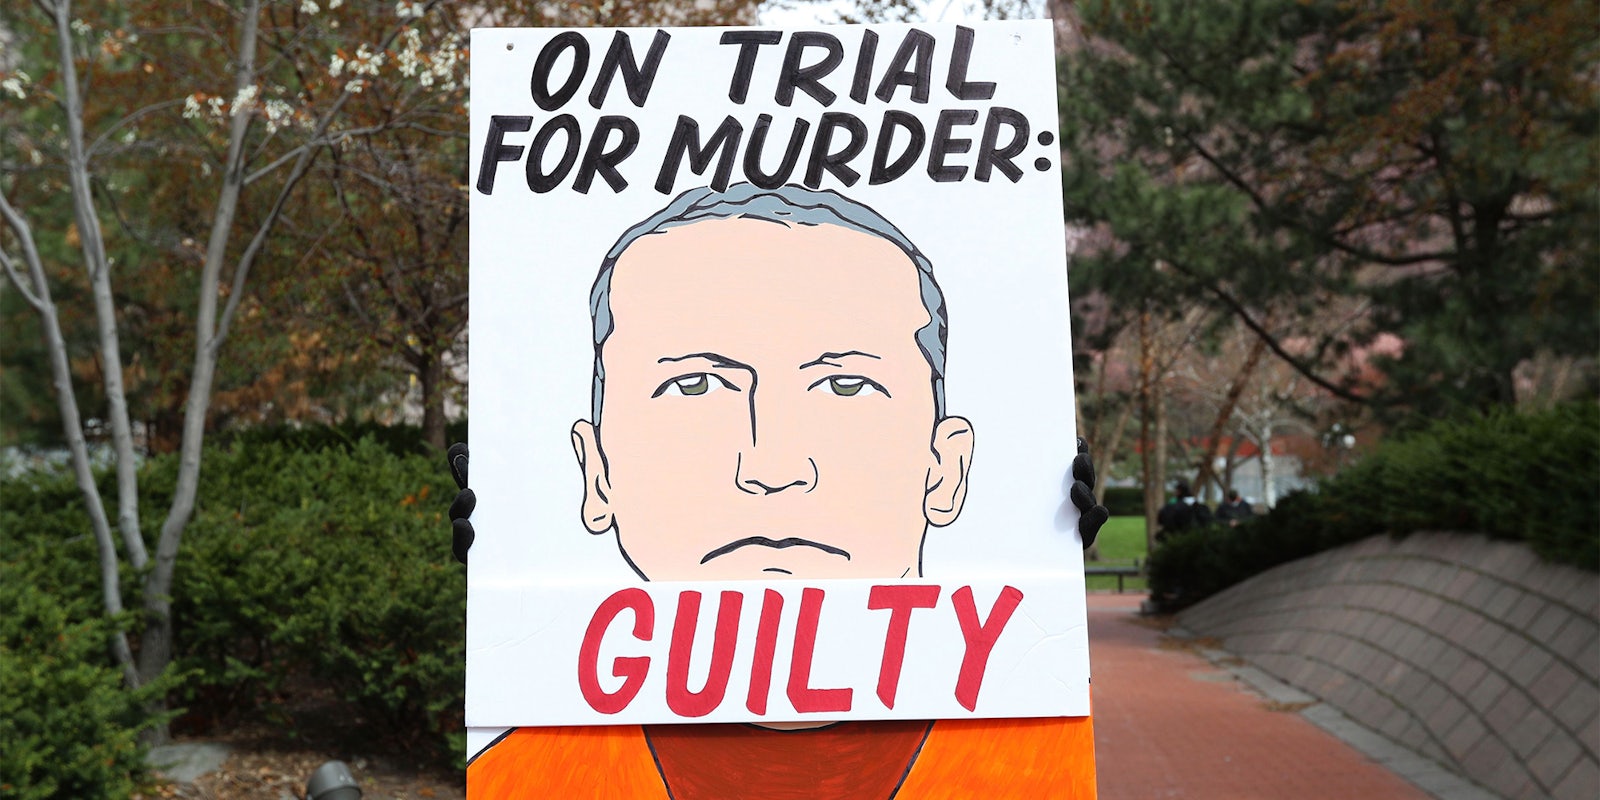 'On trial for murder: Guilty' sign with illustration of Derek Chauvin